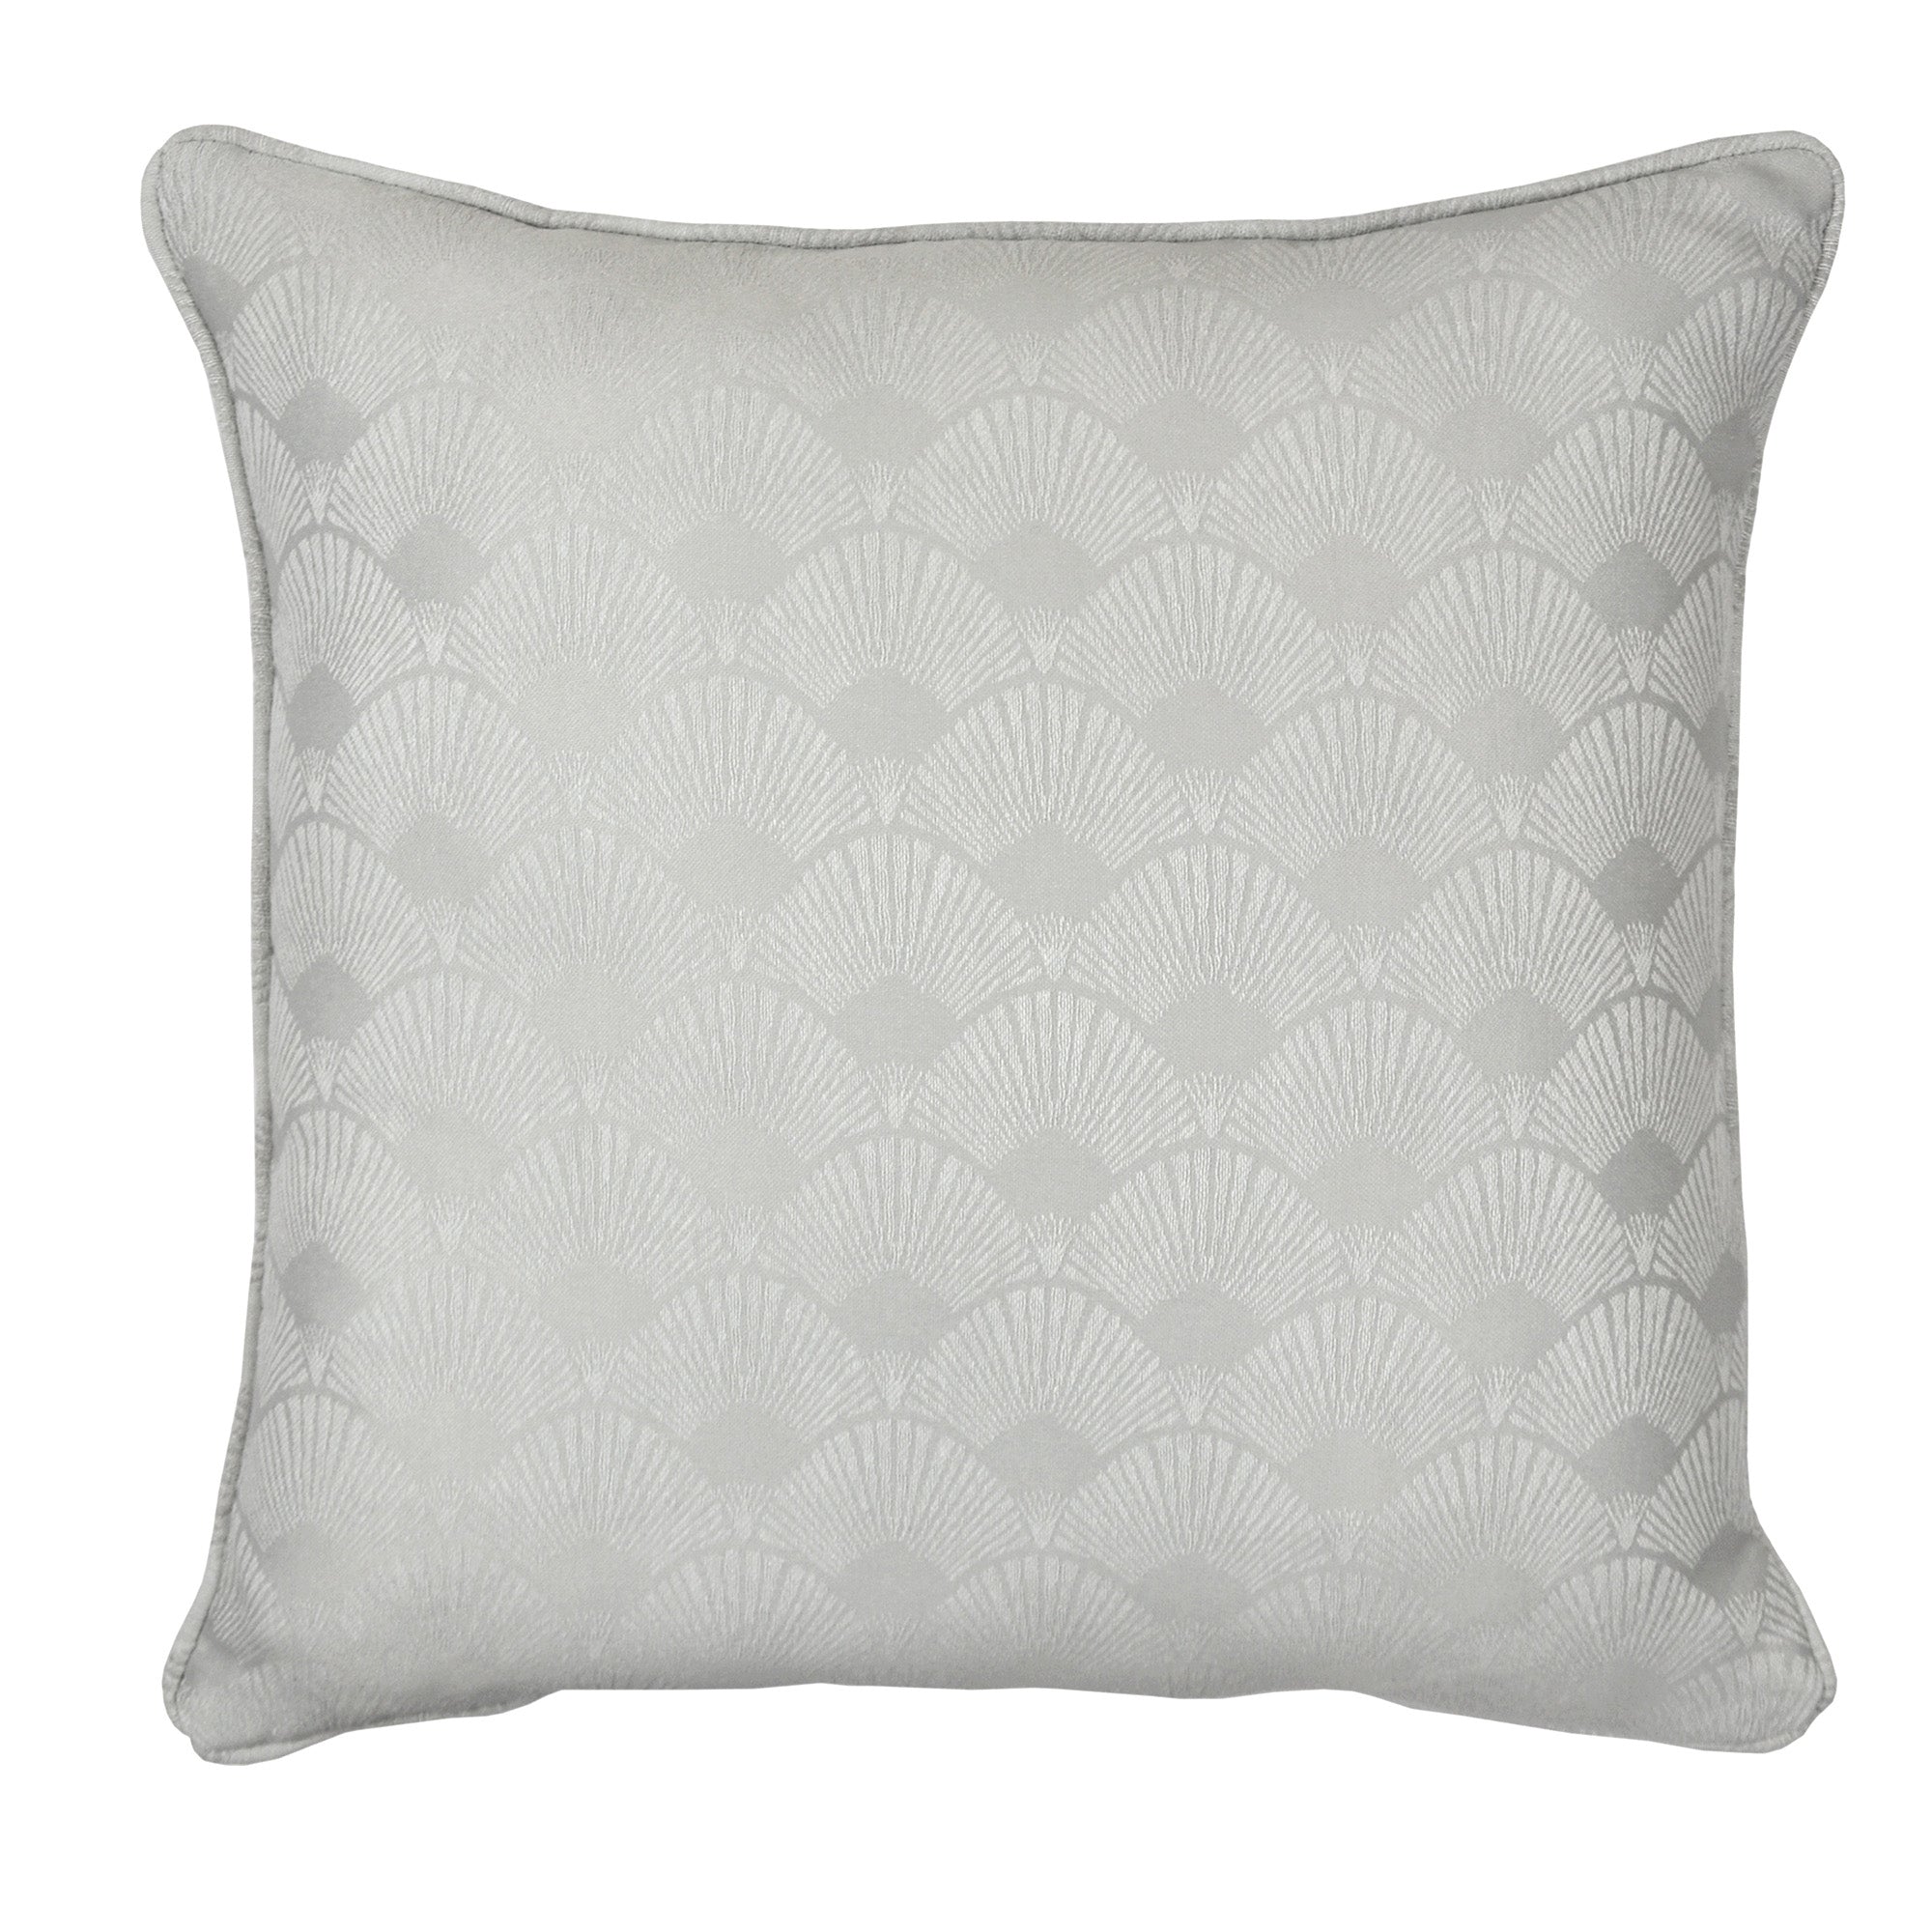 Tiffany - Jacquard Filled Cushion in Silver - by D&D Woven